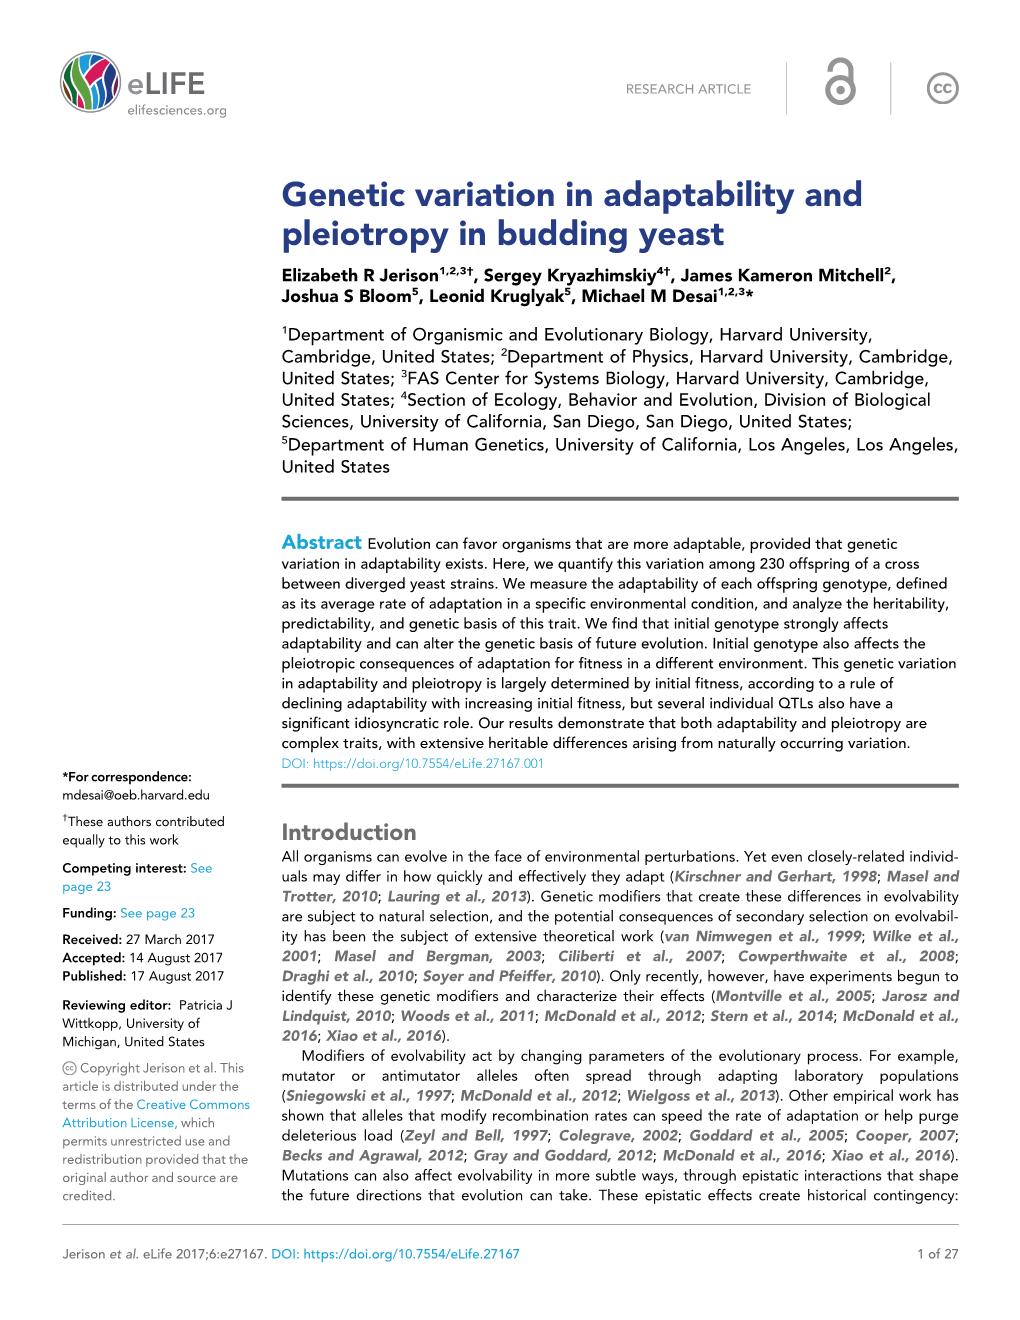 Genetic Variation in Adaptability and Pleiotropy in Budding Yeast